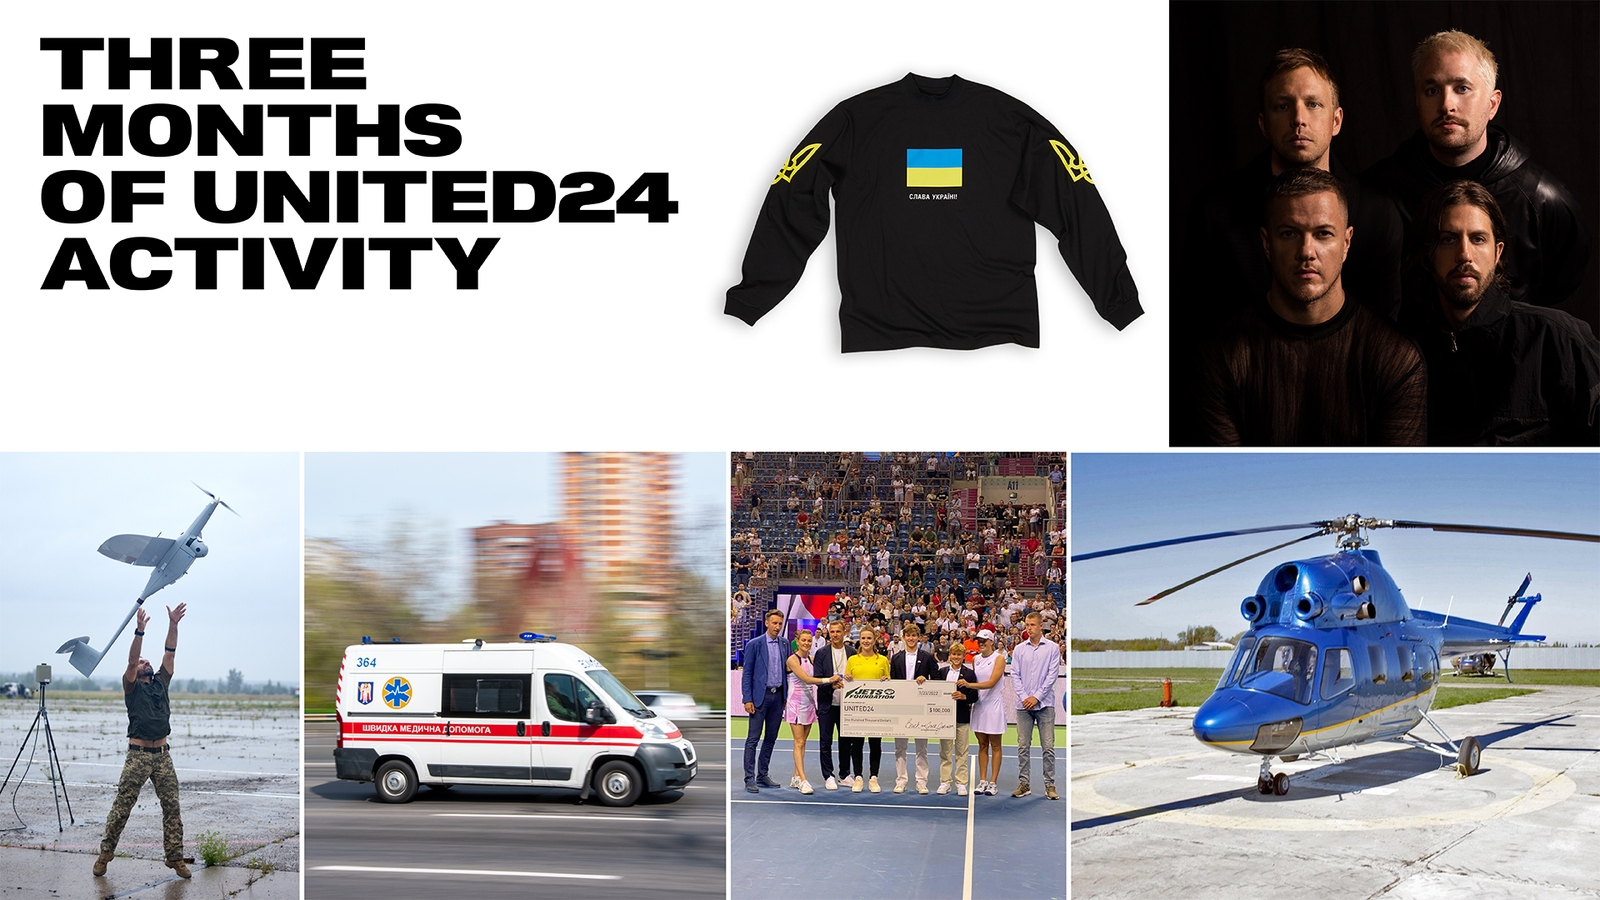 Over $166 Million in Donations, Imagine Dragons as Ambassadors, and the First Helicopter: UNITED24 Reports on Three Months of Activity